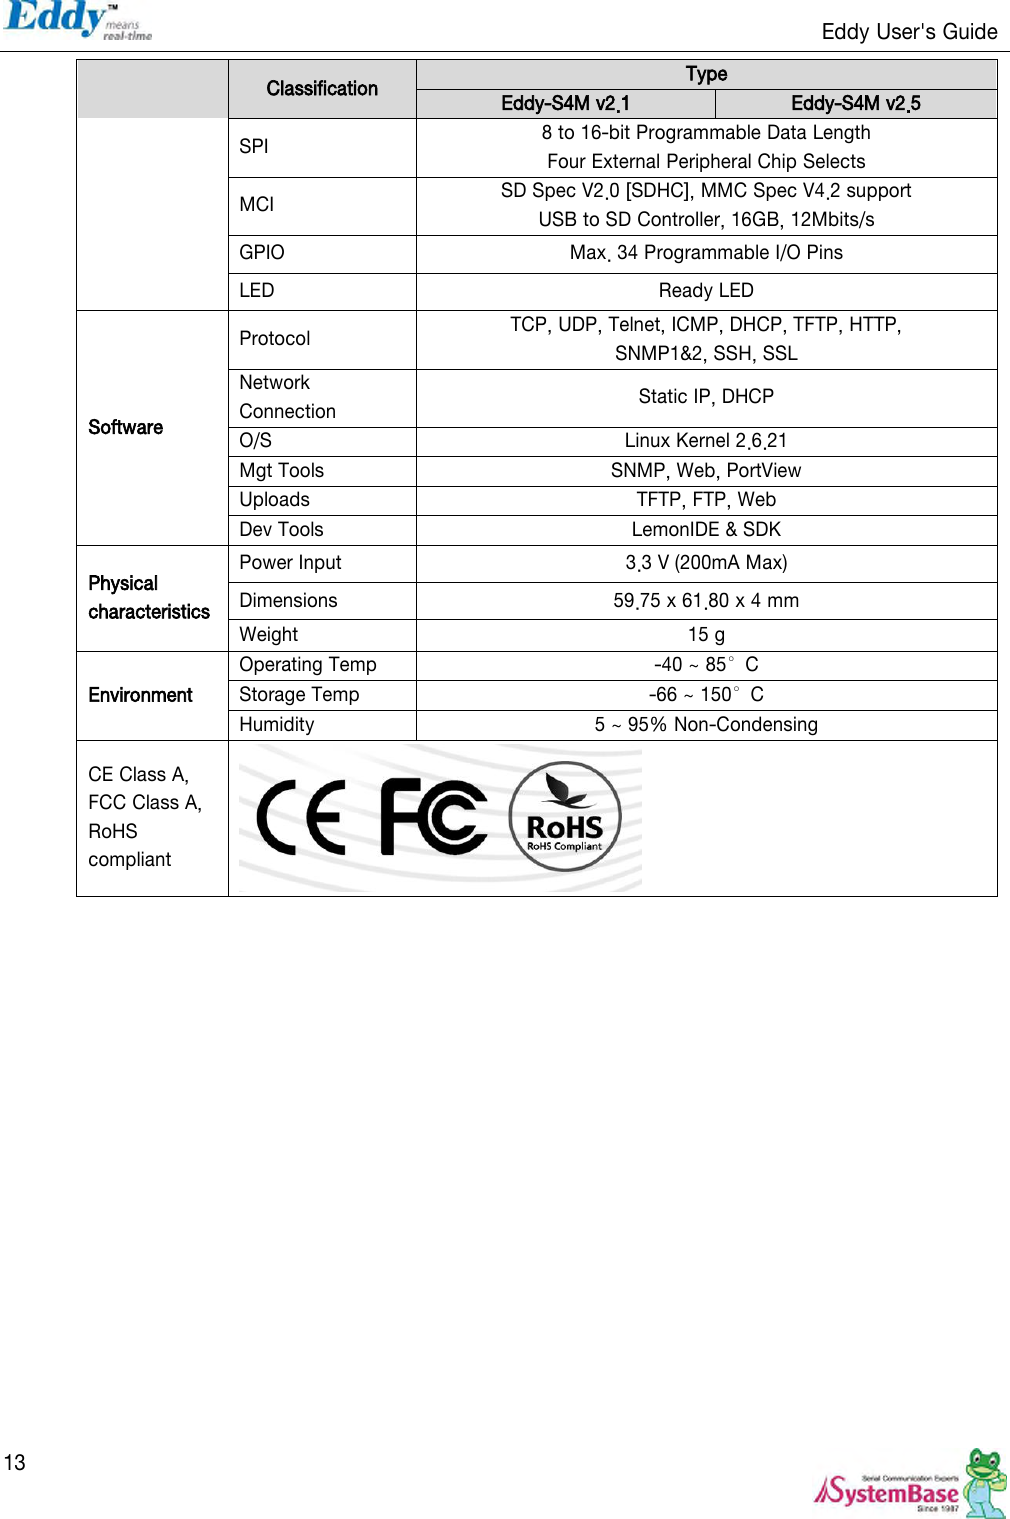                                                                   Eddy User&apos;s Guide   13  Classification Type Eddy-S4M v2.1 Eddy-S4M v2.5 SPI 8 to 16-bit Programmable Data Length Four External Peripheral Chip Selects MCI SD Spec V2.0 [SDHC], MMC Spec V4.2 support USB to SD Controller, 16GB, 12Mbits/s GPIO Max. 34 Programmable I/O Pins LED Ready LED Software Protocol   TCP, UDP, Telnet, ICMP, DHCP, TFTP, HTTP, SNMP1&amp;2, SSH, SSL Network Connection Static IP, DHCP O/S Linux Kernel 2.6.21 Mgt Tools   SNMP, Web, PortView Uploads TFTP, FTP, Web Dev Tools LemonIDE &amp; SDK Physical characteristics Power Input 3.3 V (200mA Max) Dimensions 59.75 x 61.80 x 4 mm Weight 15 g Environment Operating Temp -40 ~ 85°C Storage Temp -66 ~ 150°C Humidity 5 ~ 95% Non-Condensing CE Class A, FCC Class A, RoHS compliant     